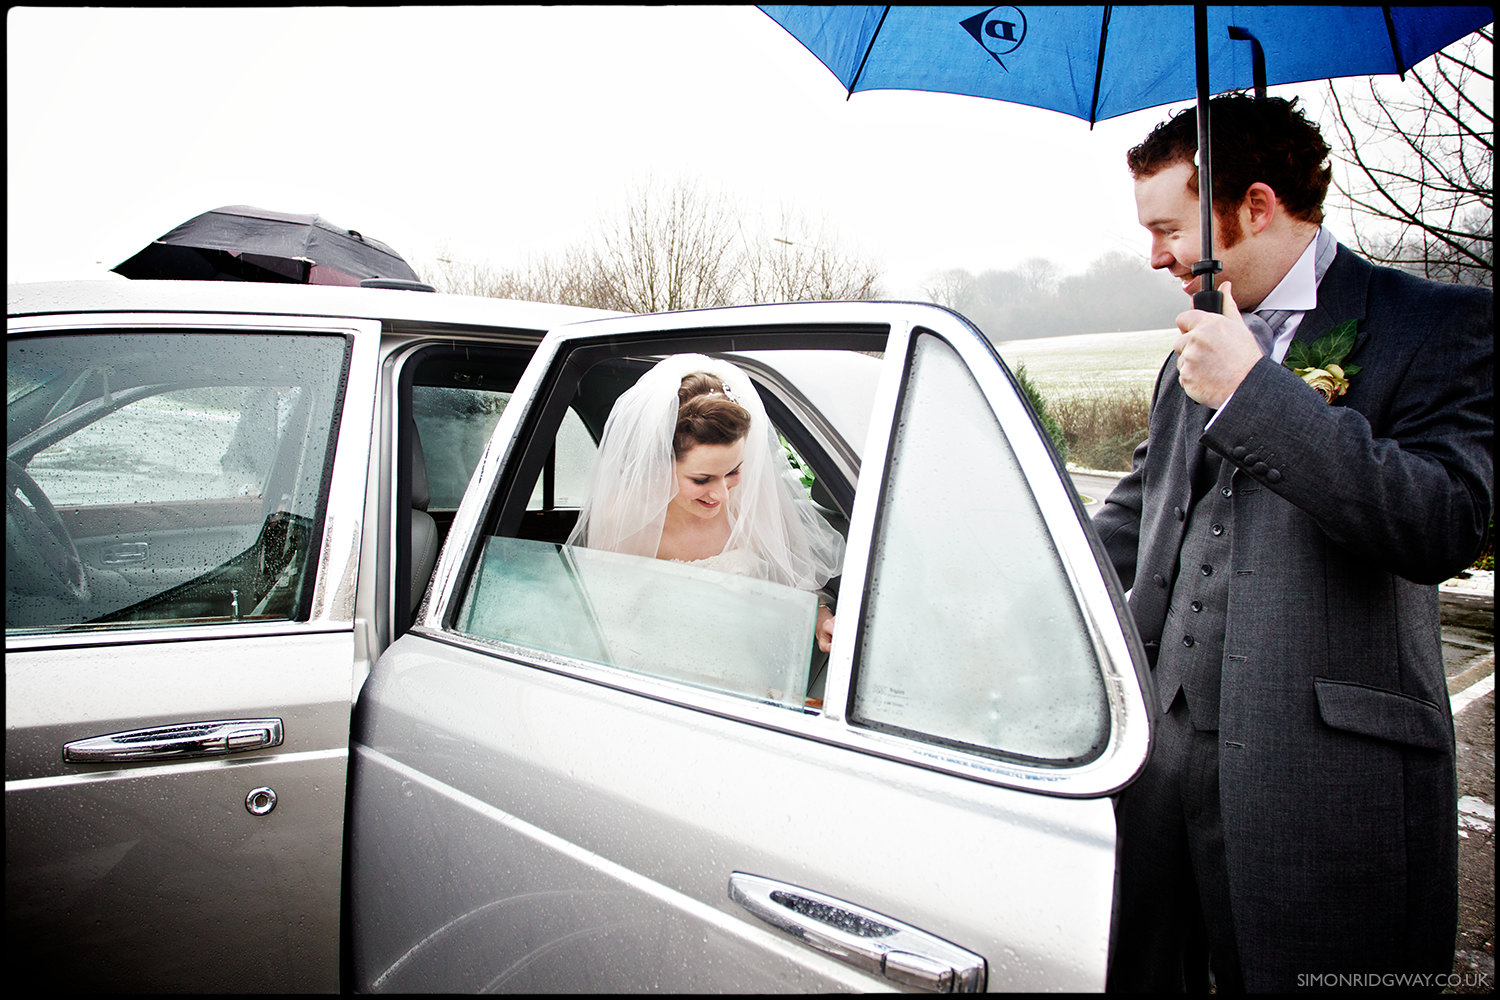 Reportage Wedding Photography, Miskin, South Wales